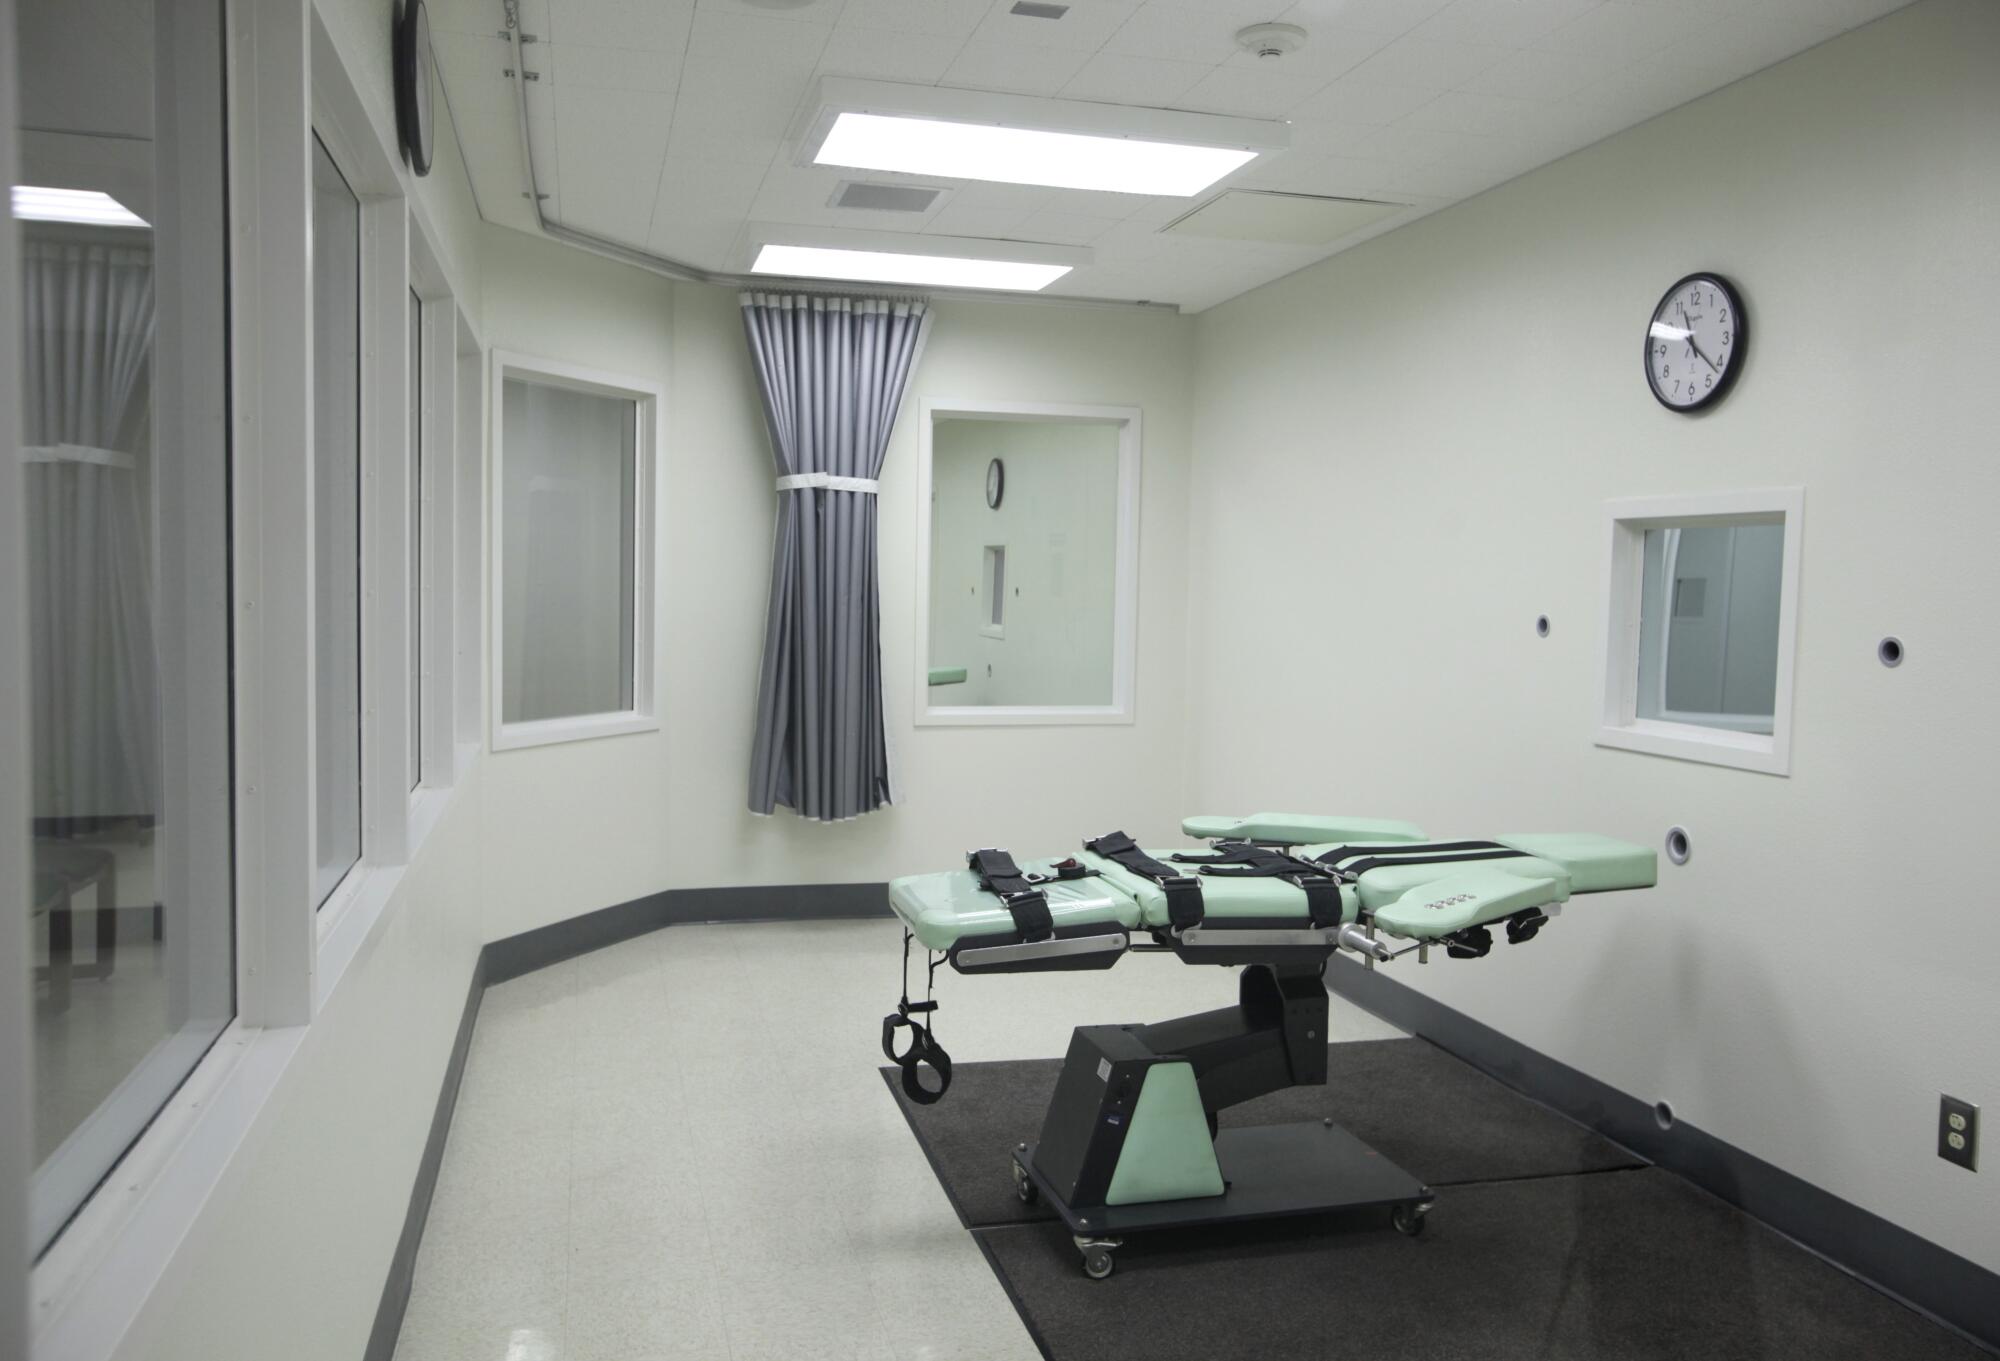 The lethal injection chamber at San Quentin State Prison in 2010.